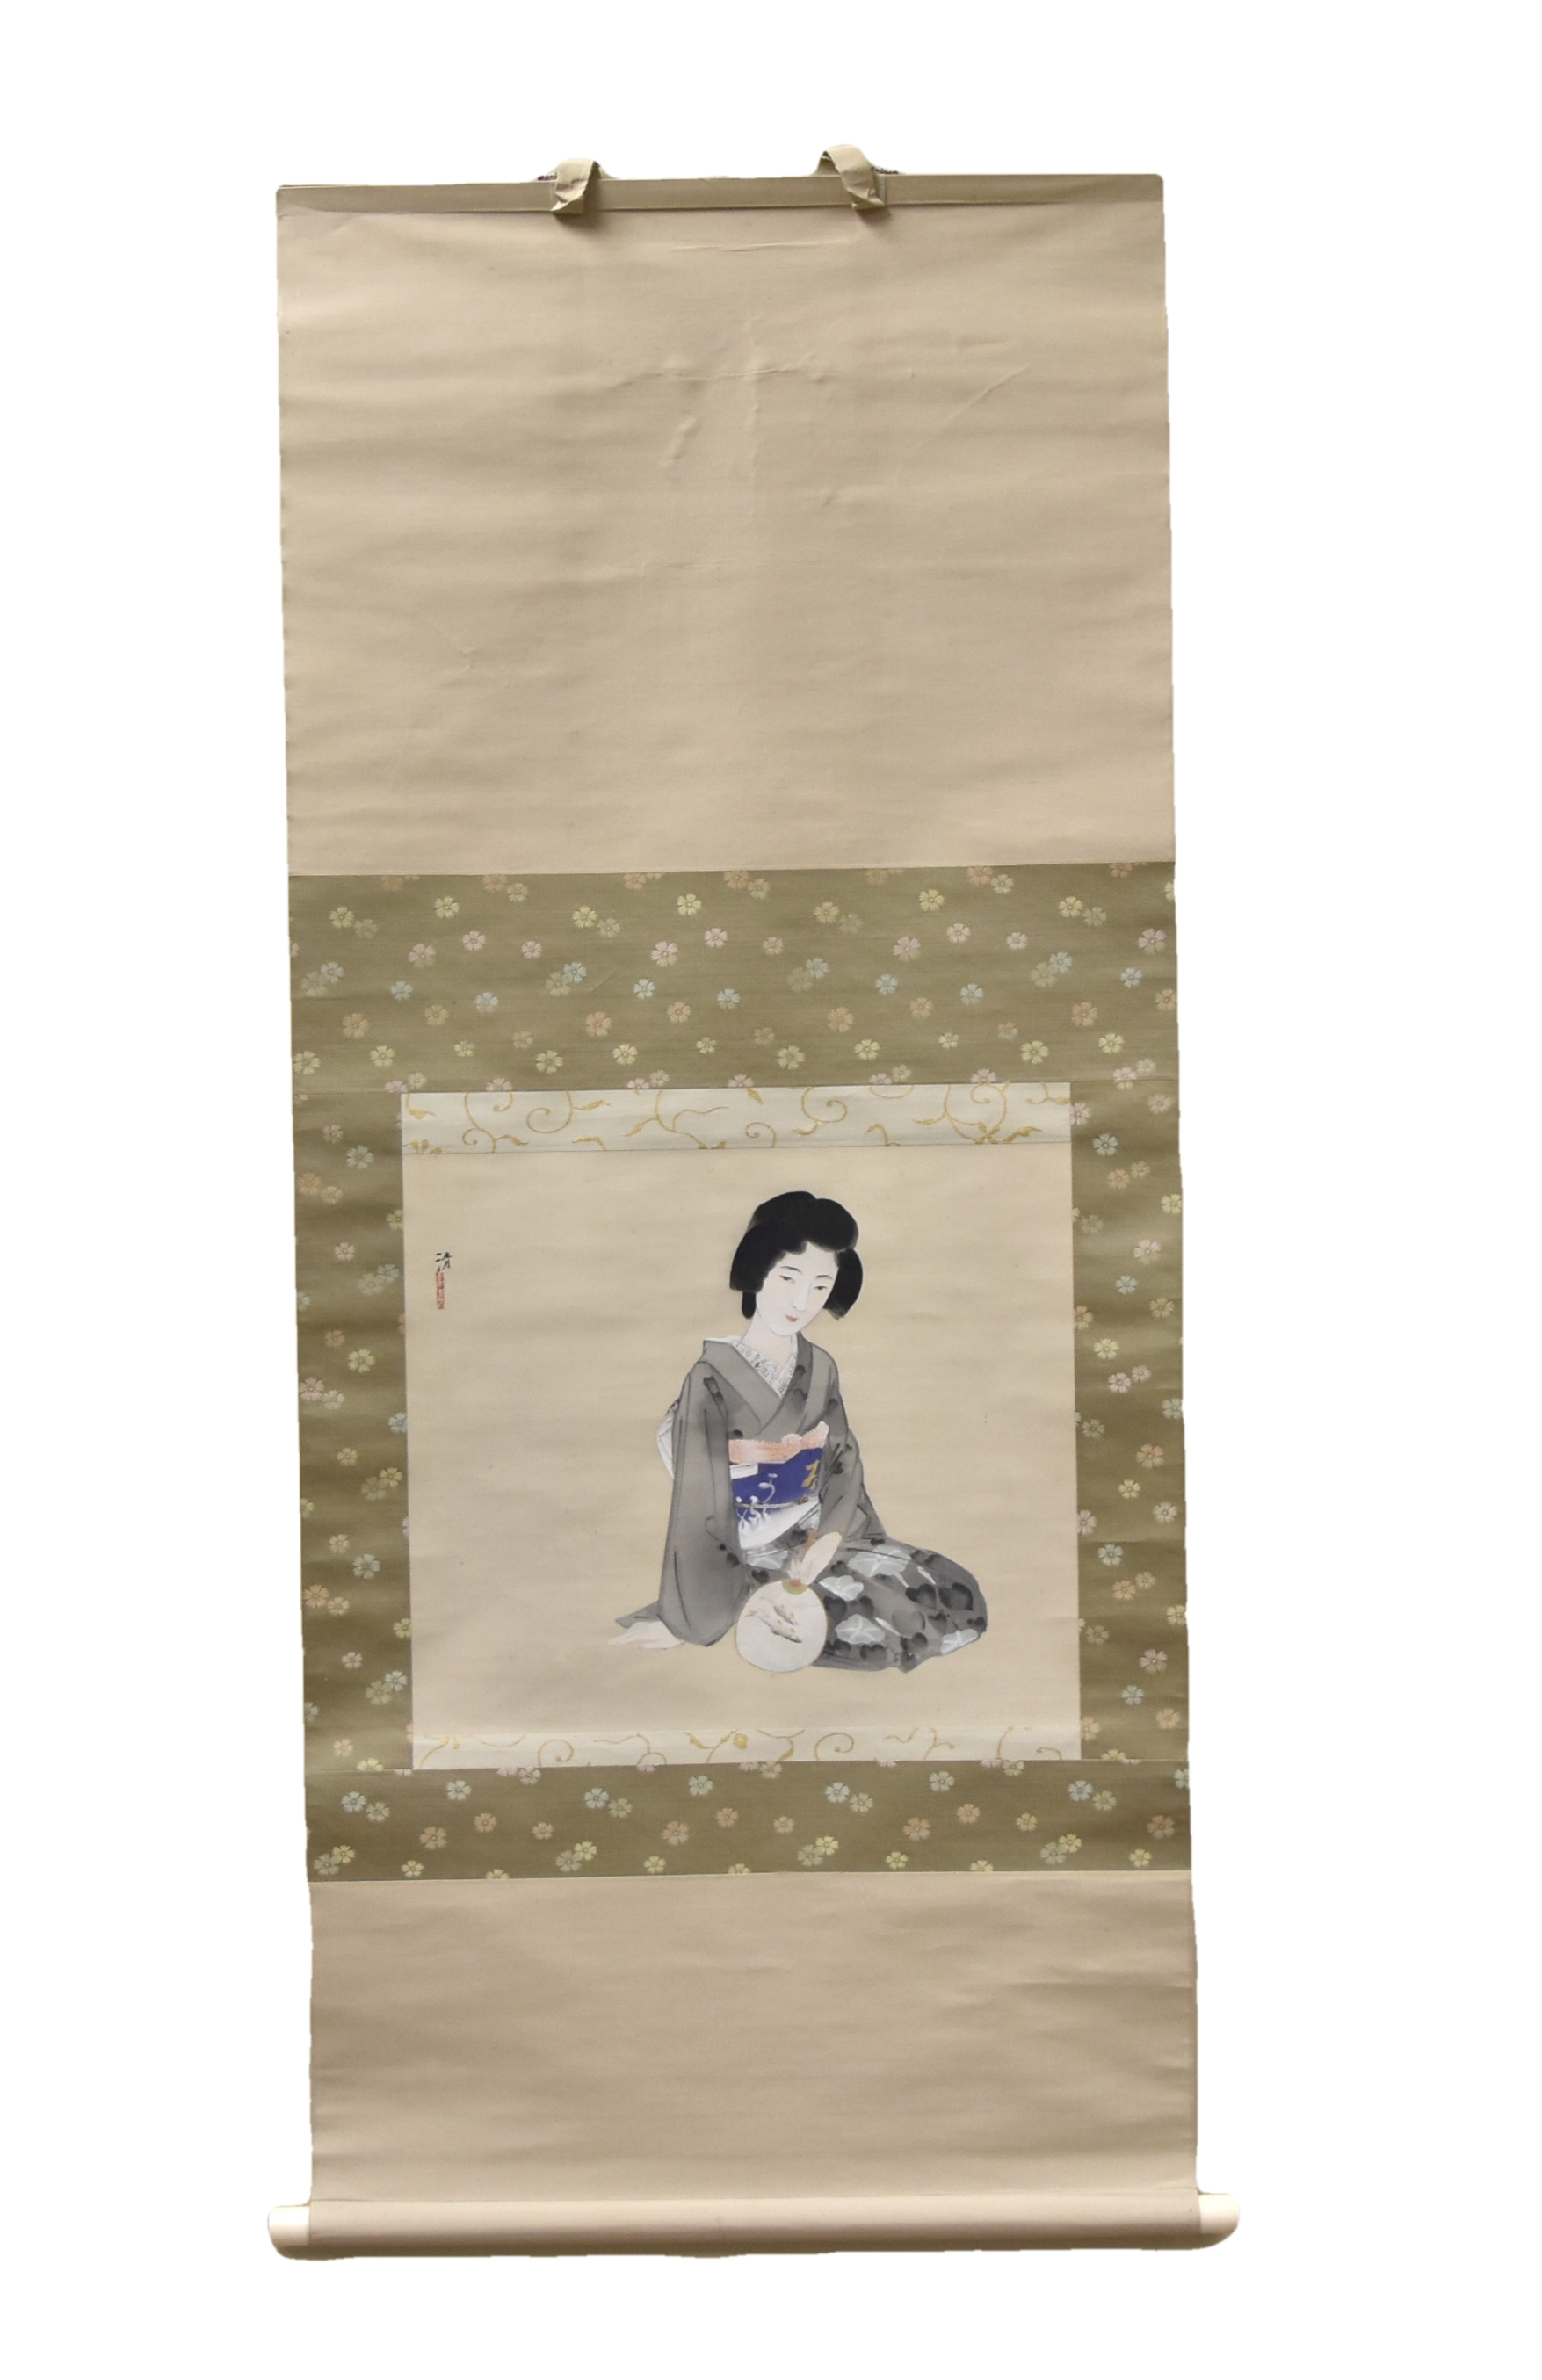 PAINTING OF A JAPANESE FEMALE FIGURE 3396ee